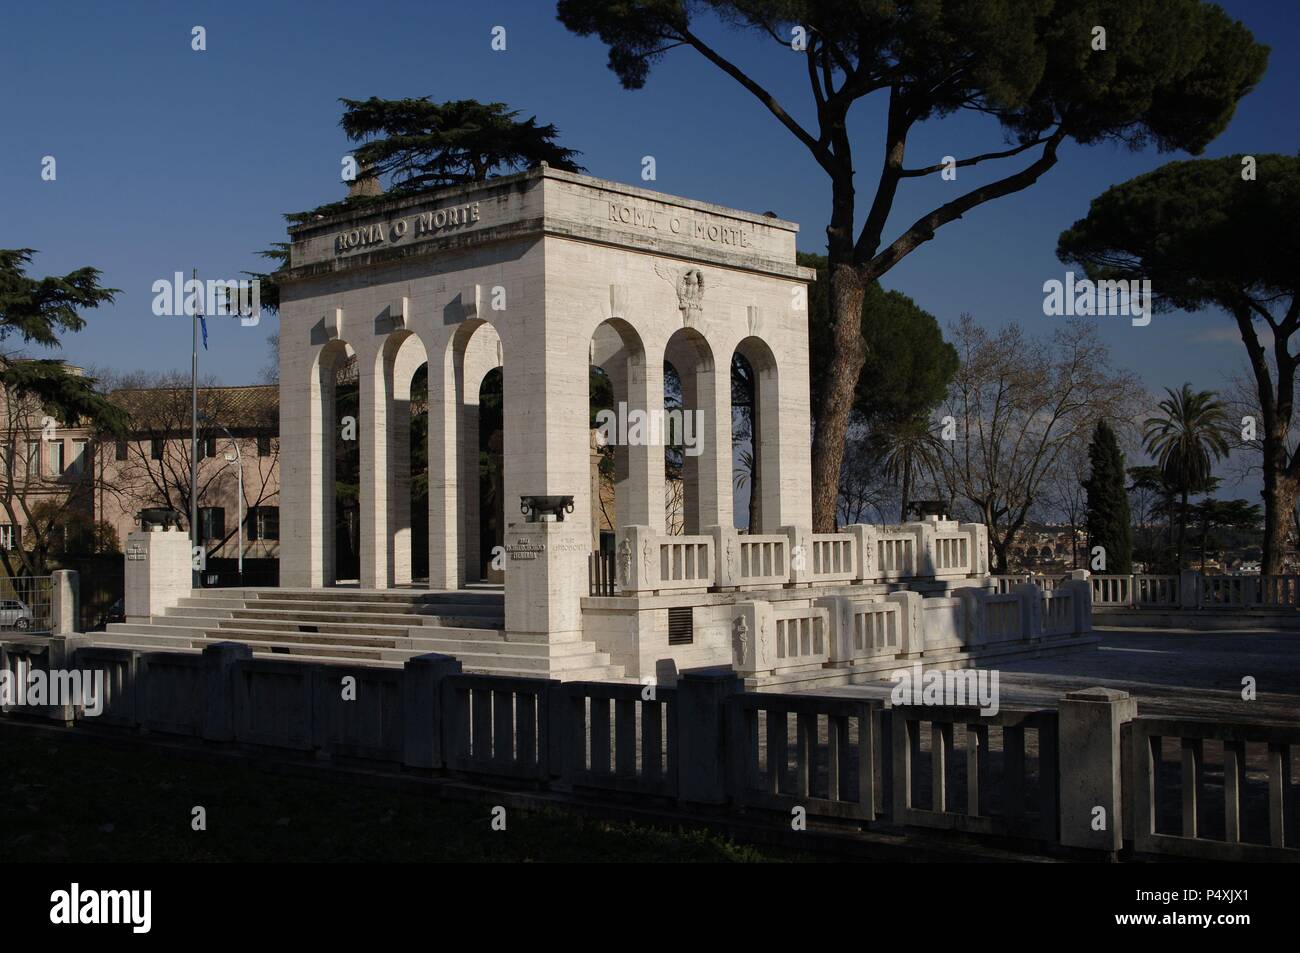 Italy. Rome. Mausoleum Gianicolense, erected in honor of fallen patriots during the Italian Unification. Stock Photo